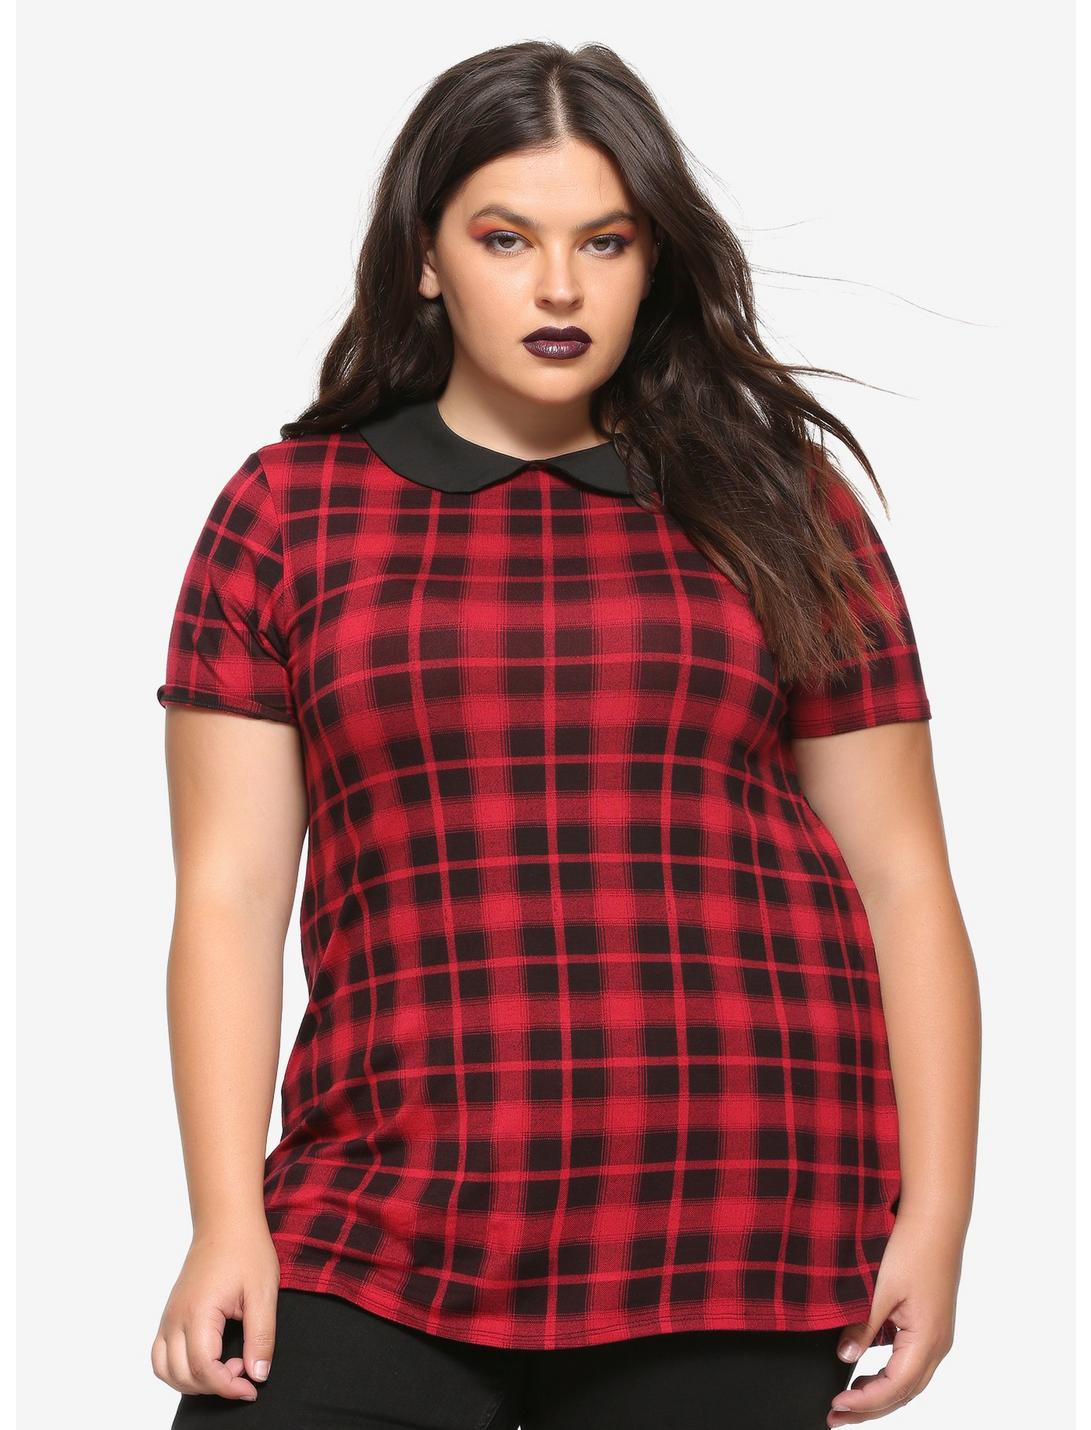 Red Plaid Collared Girls T-Shirt Plus Size, PLAID - RED, hi-res